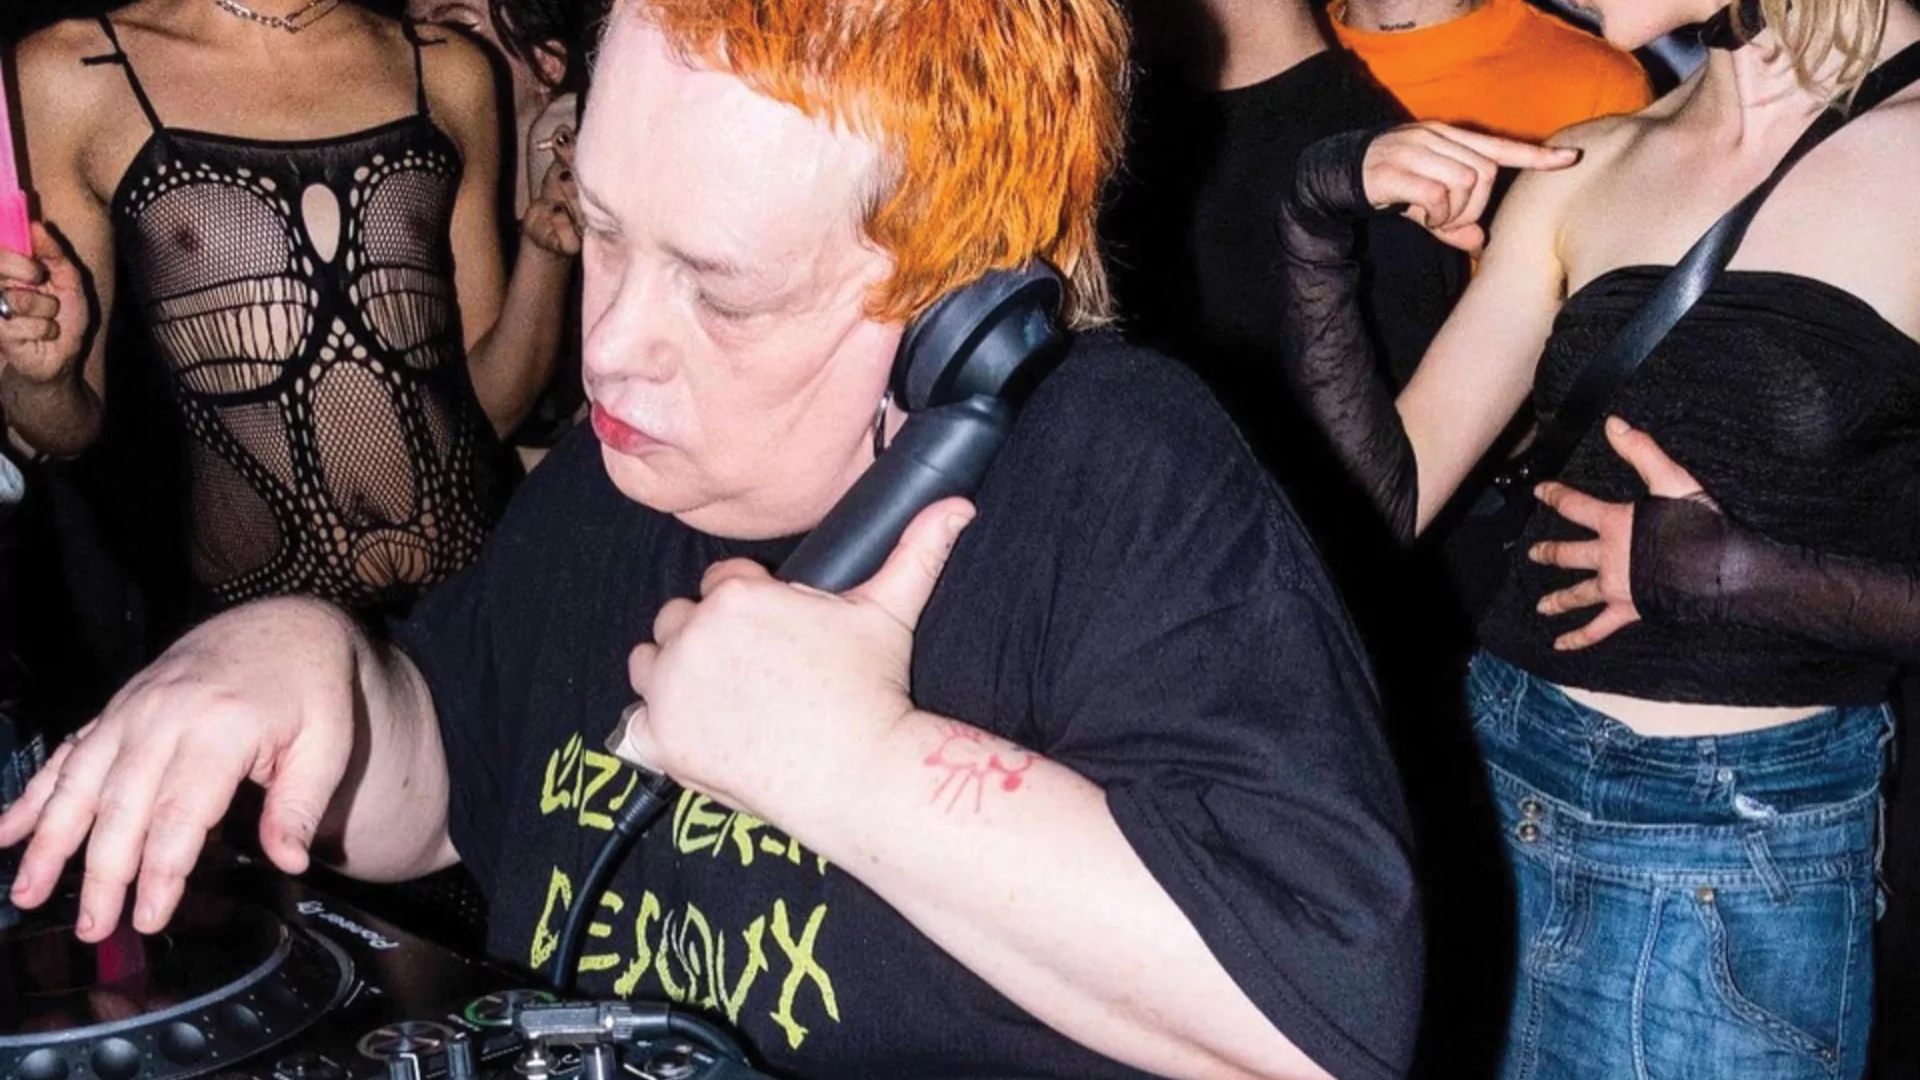 Jaye Ward with short cropped orange hair DJing with a group of dancers behind her